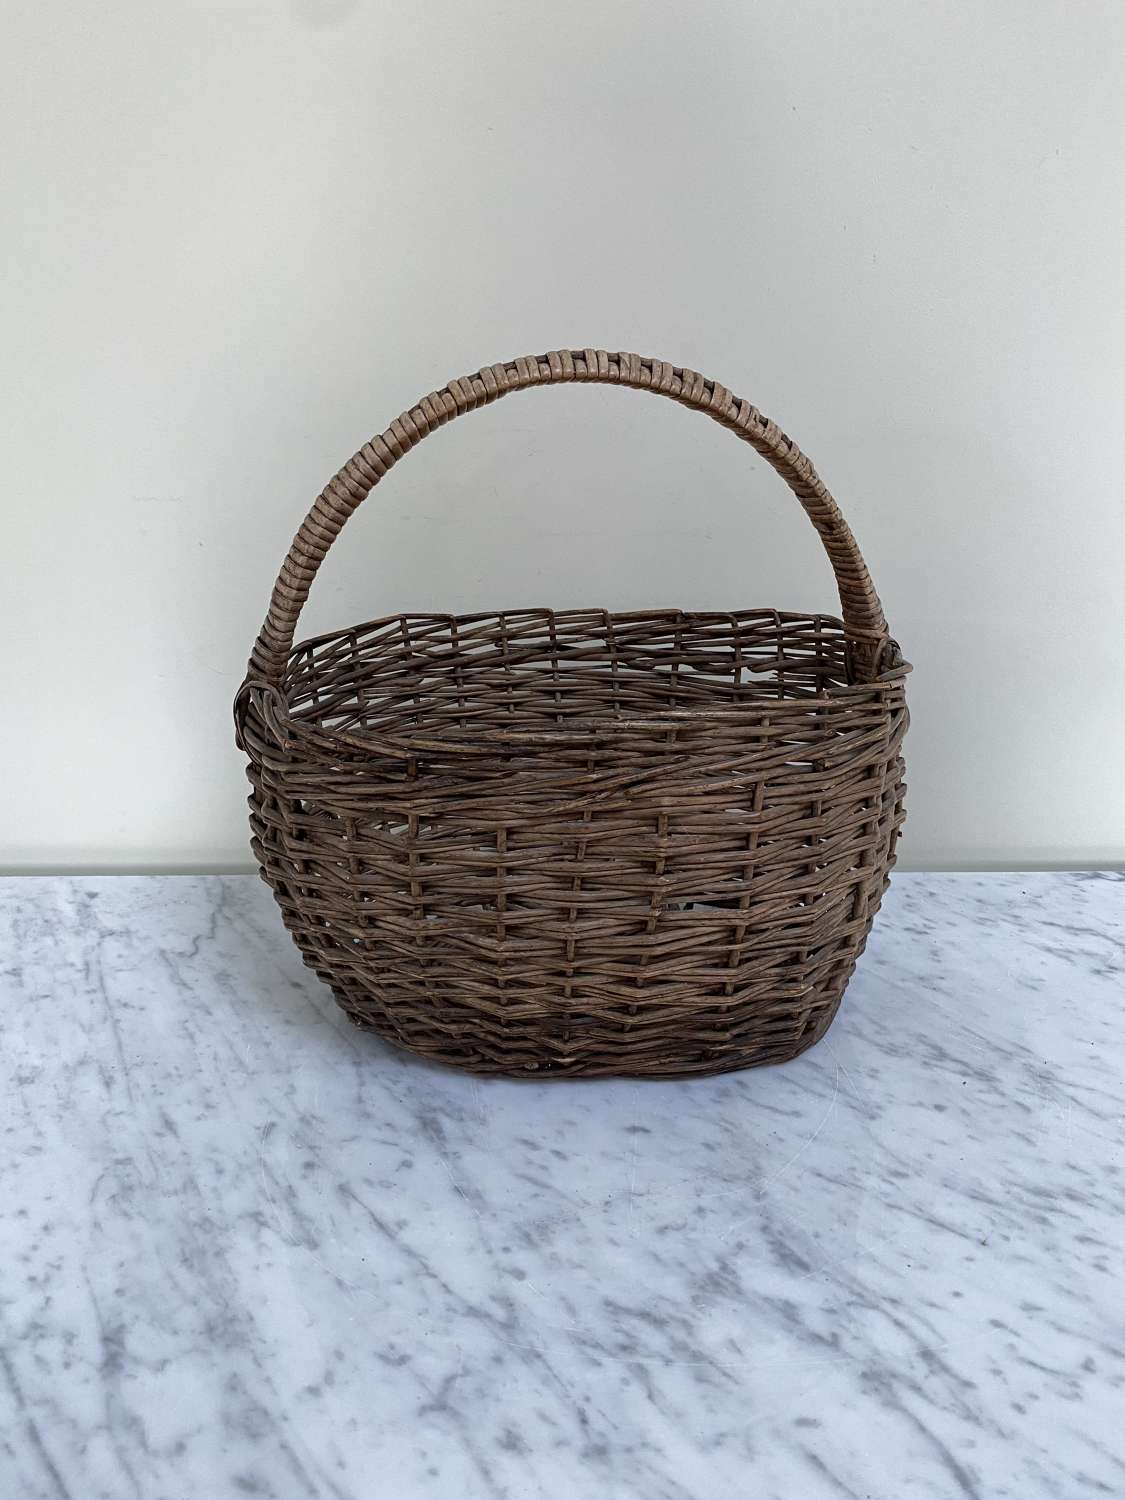 Antique Basket in Great Condition.